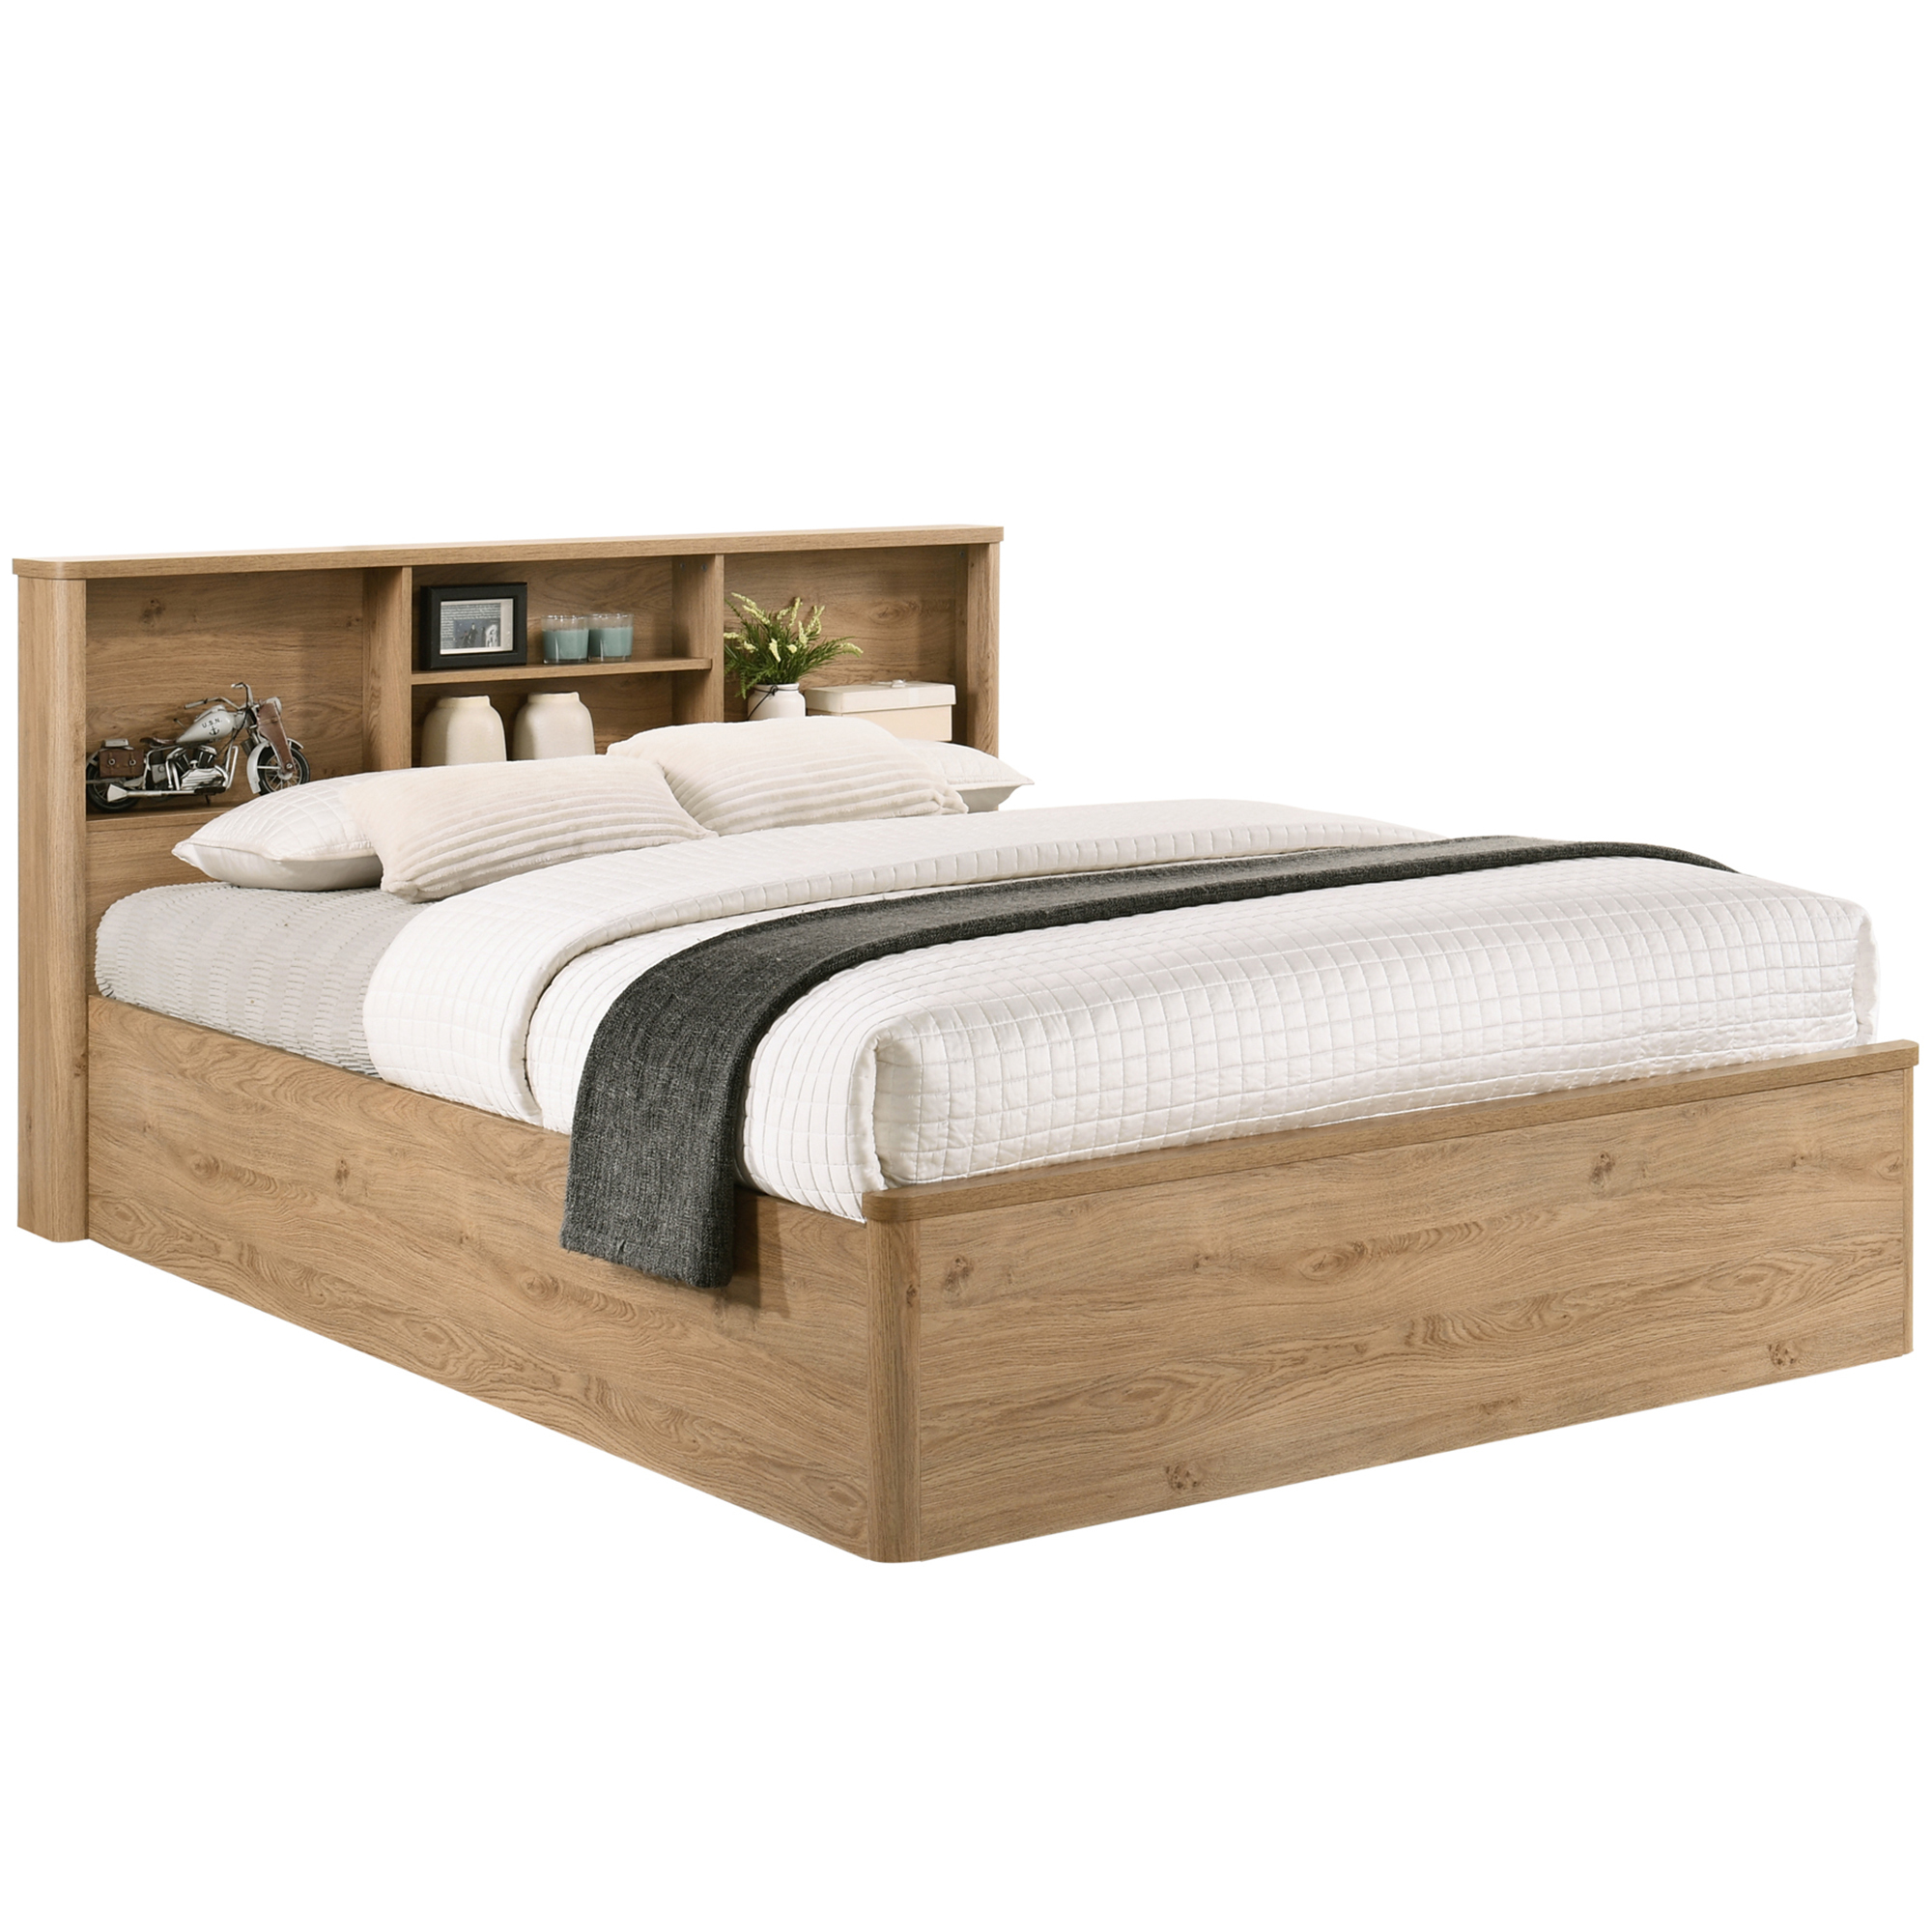 Natural Anderson Queen Bed With Bookcase Headboard Temple Webster